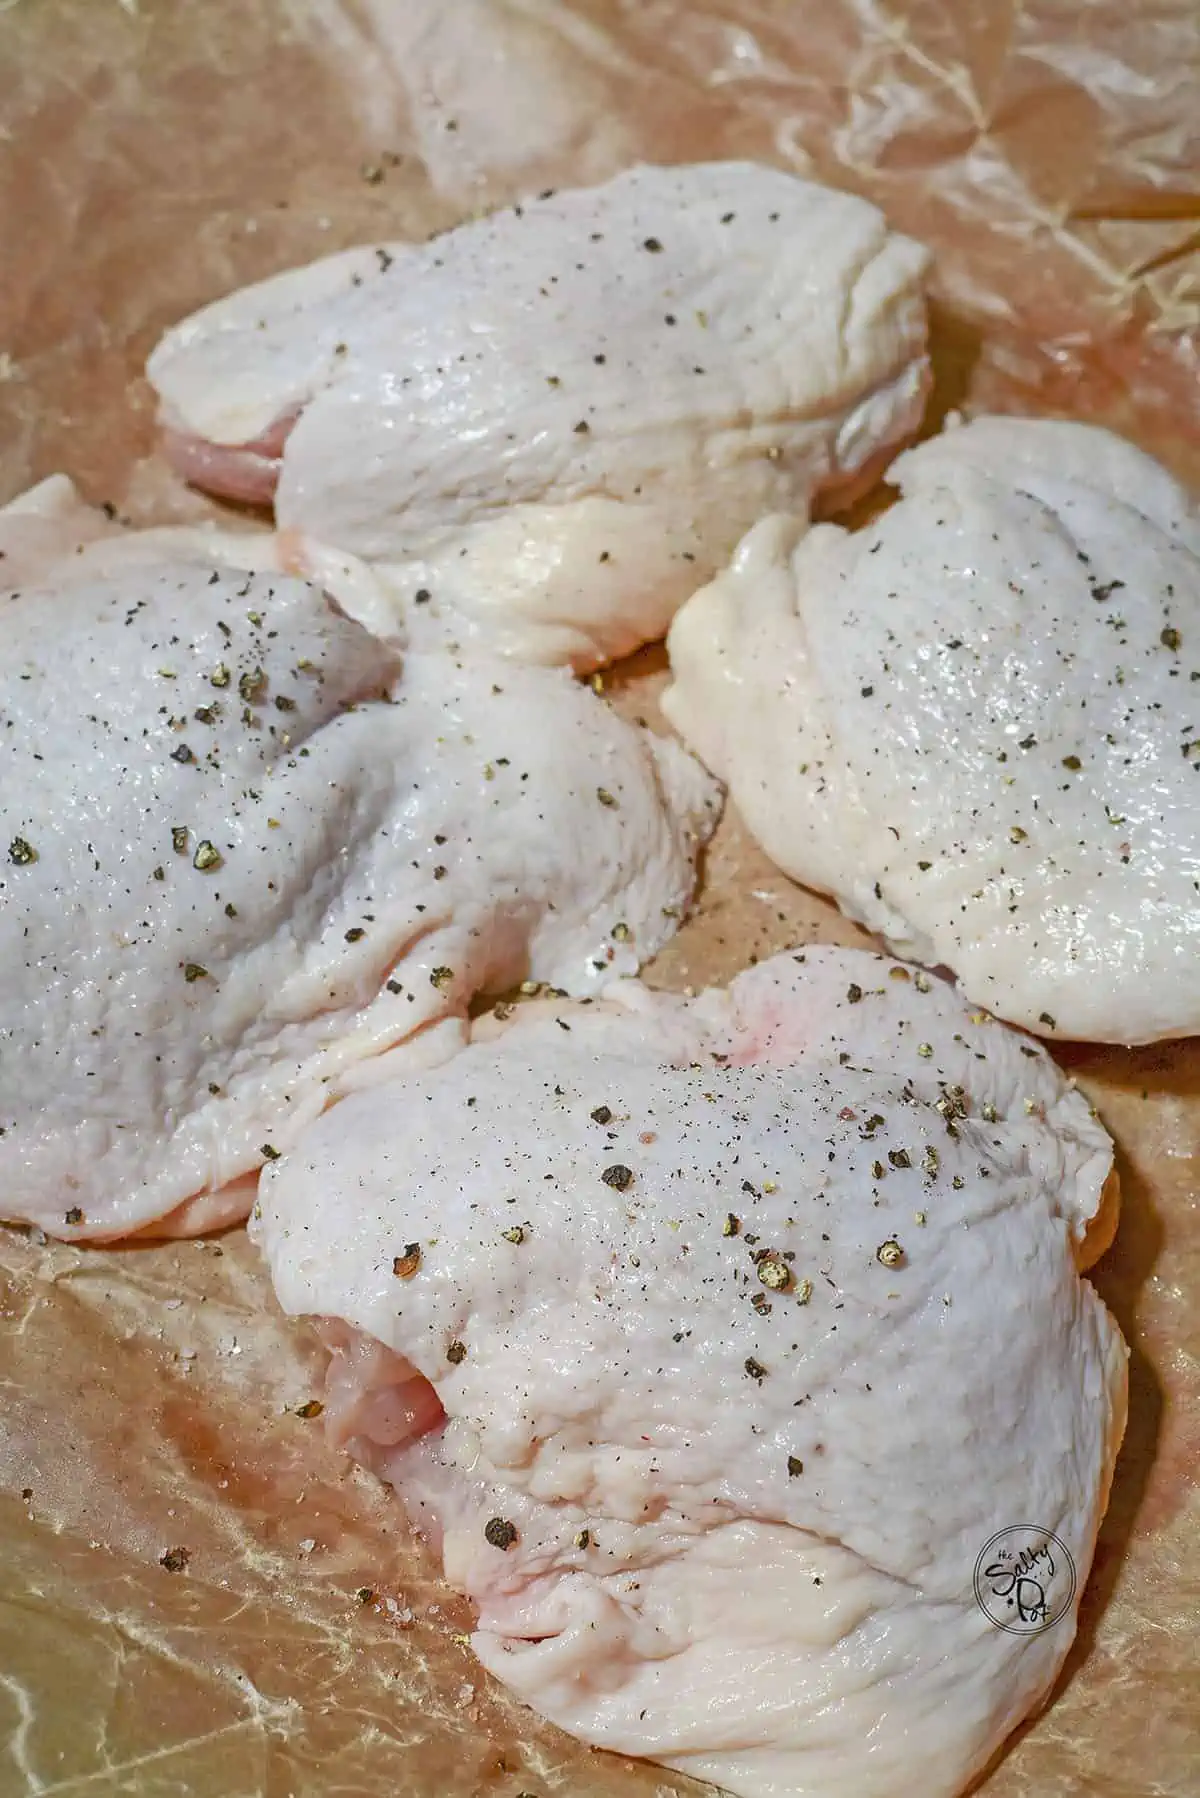 Chicken thighs that are raw, sitting on brown butcher paper, that have been seasoned.